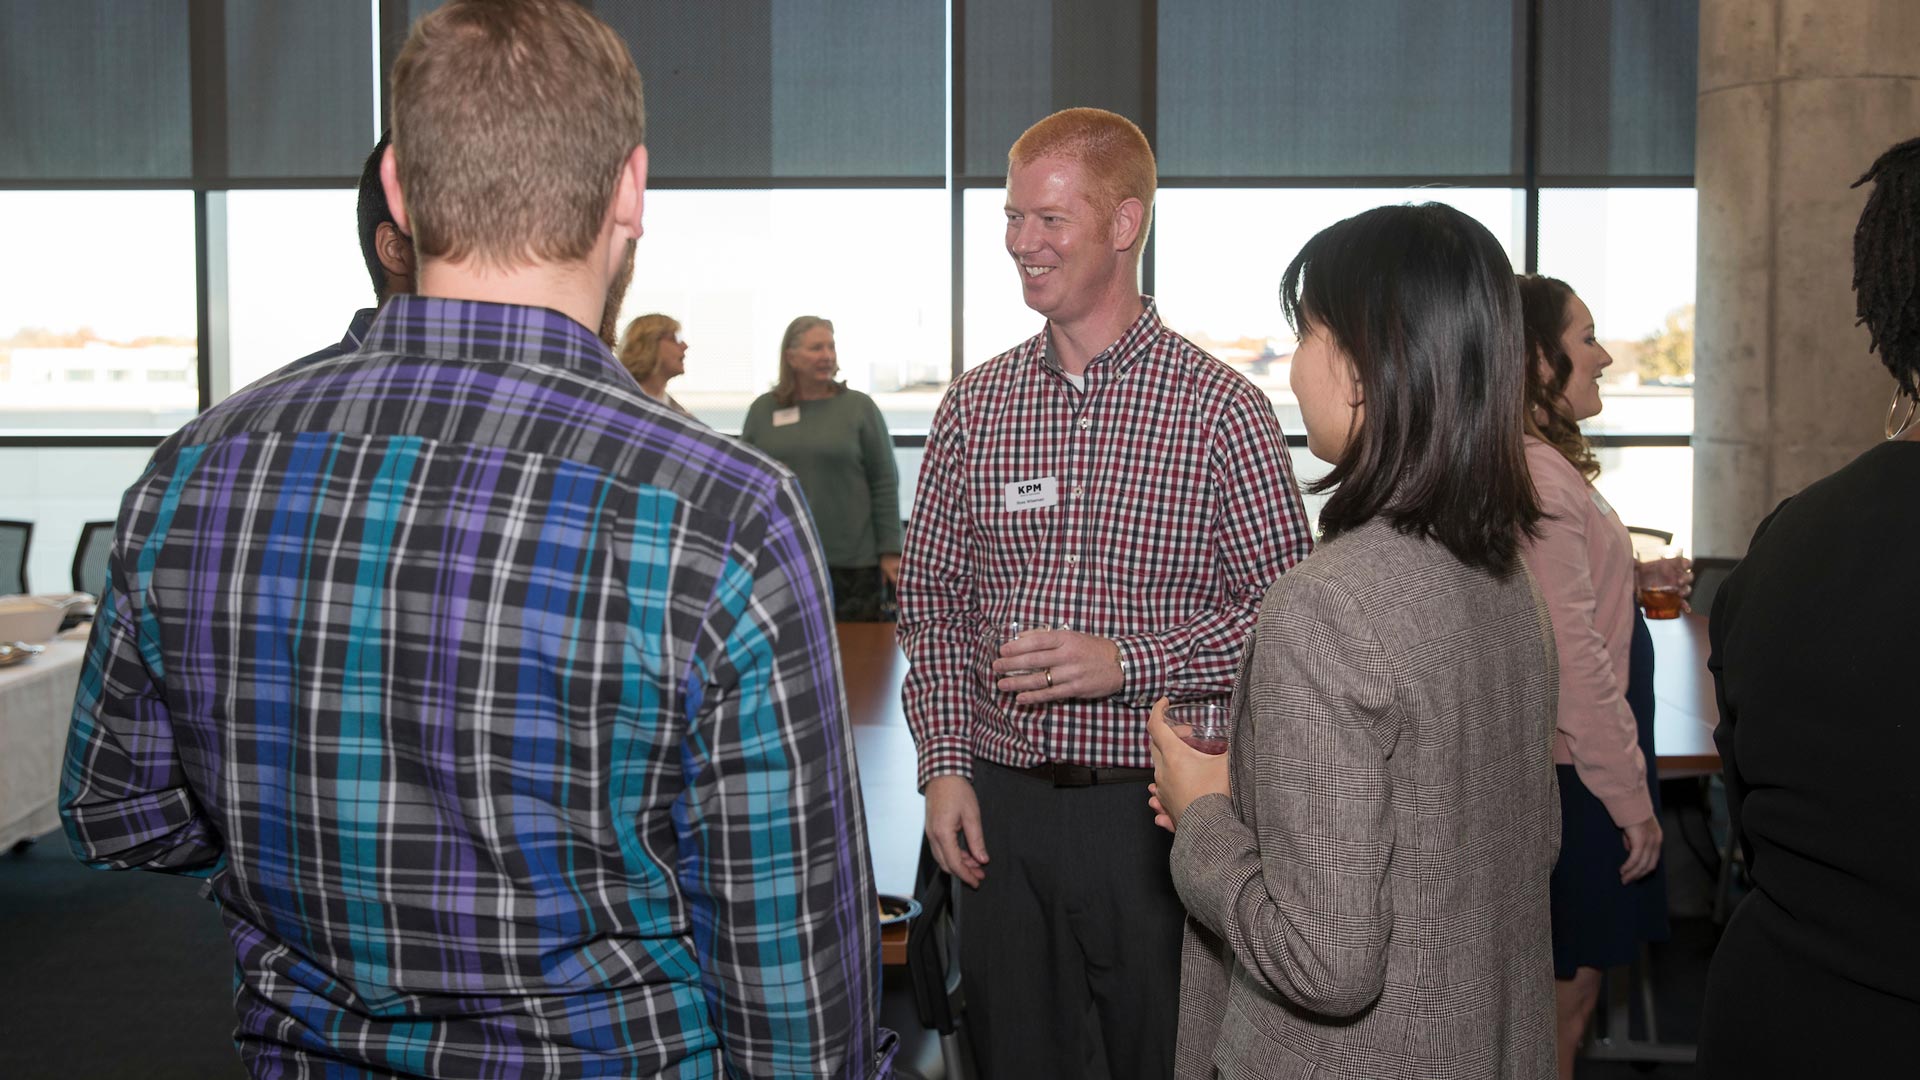 alumni and students talking at networking event